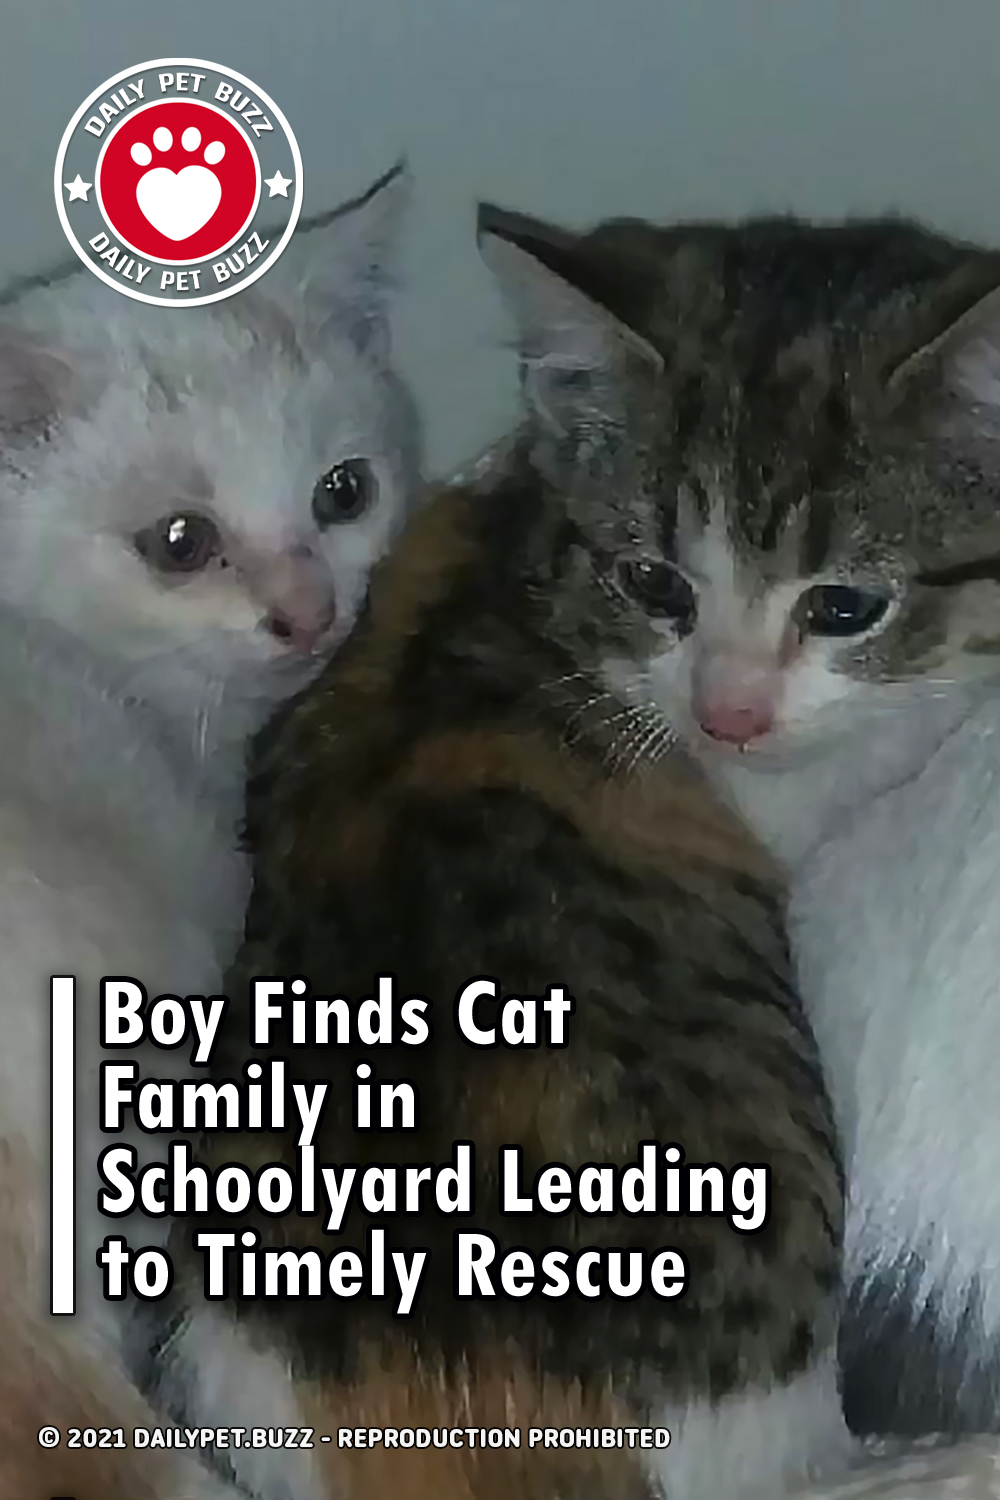 Boy Finds Cat Family in Schoolyard Leading to Timely Rescue